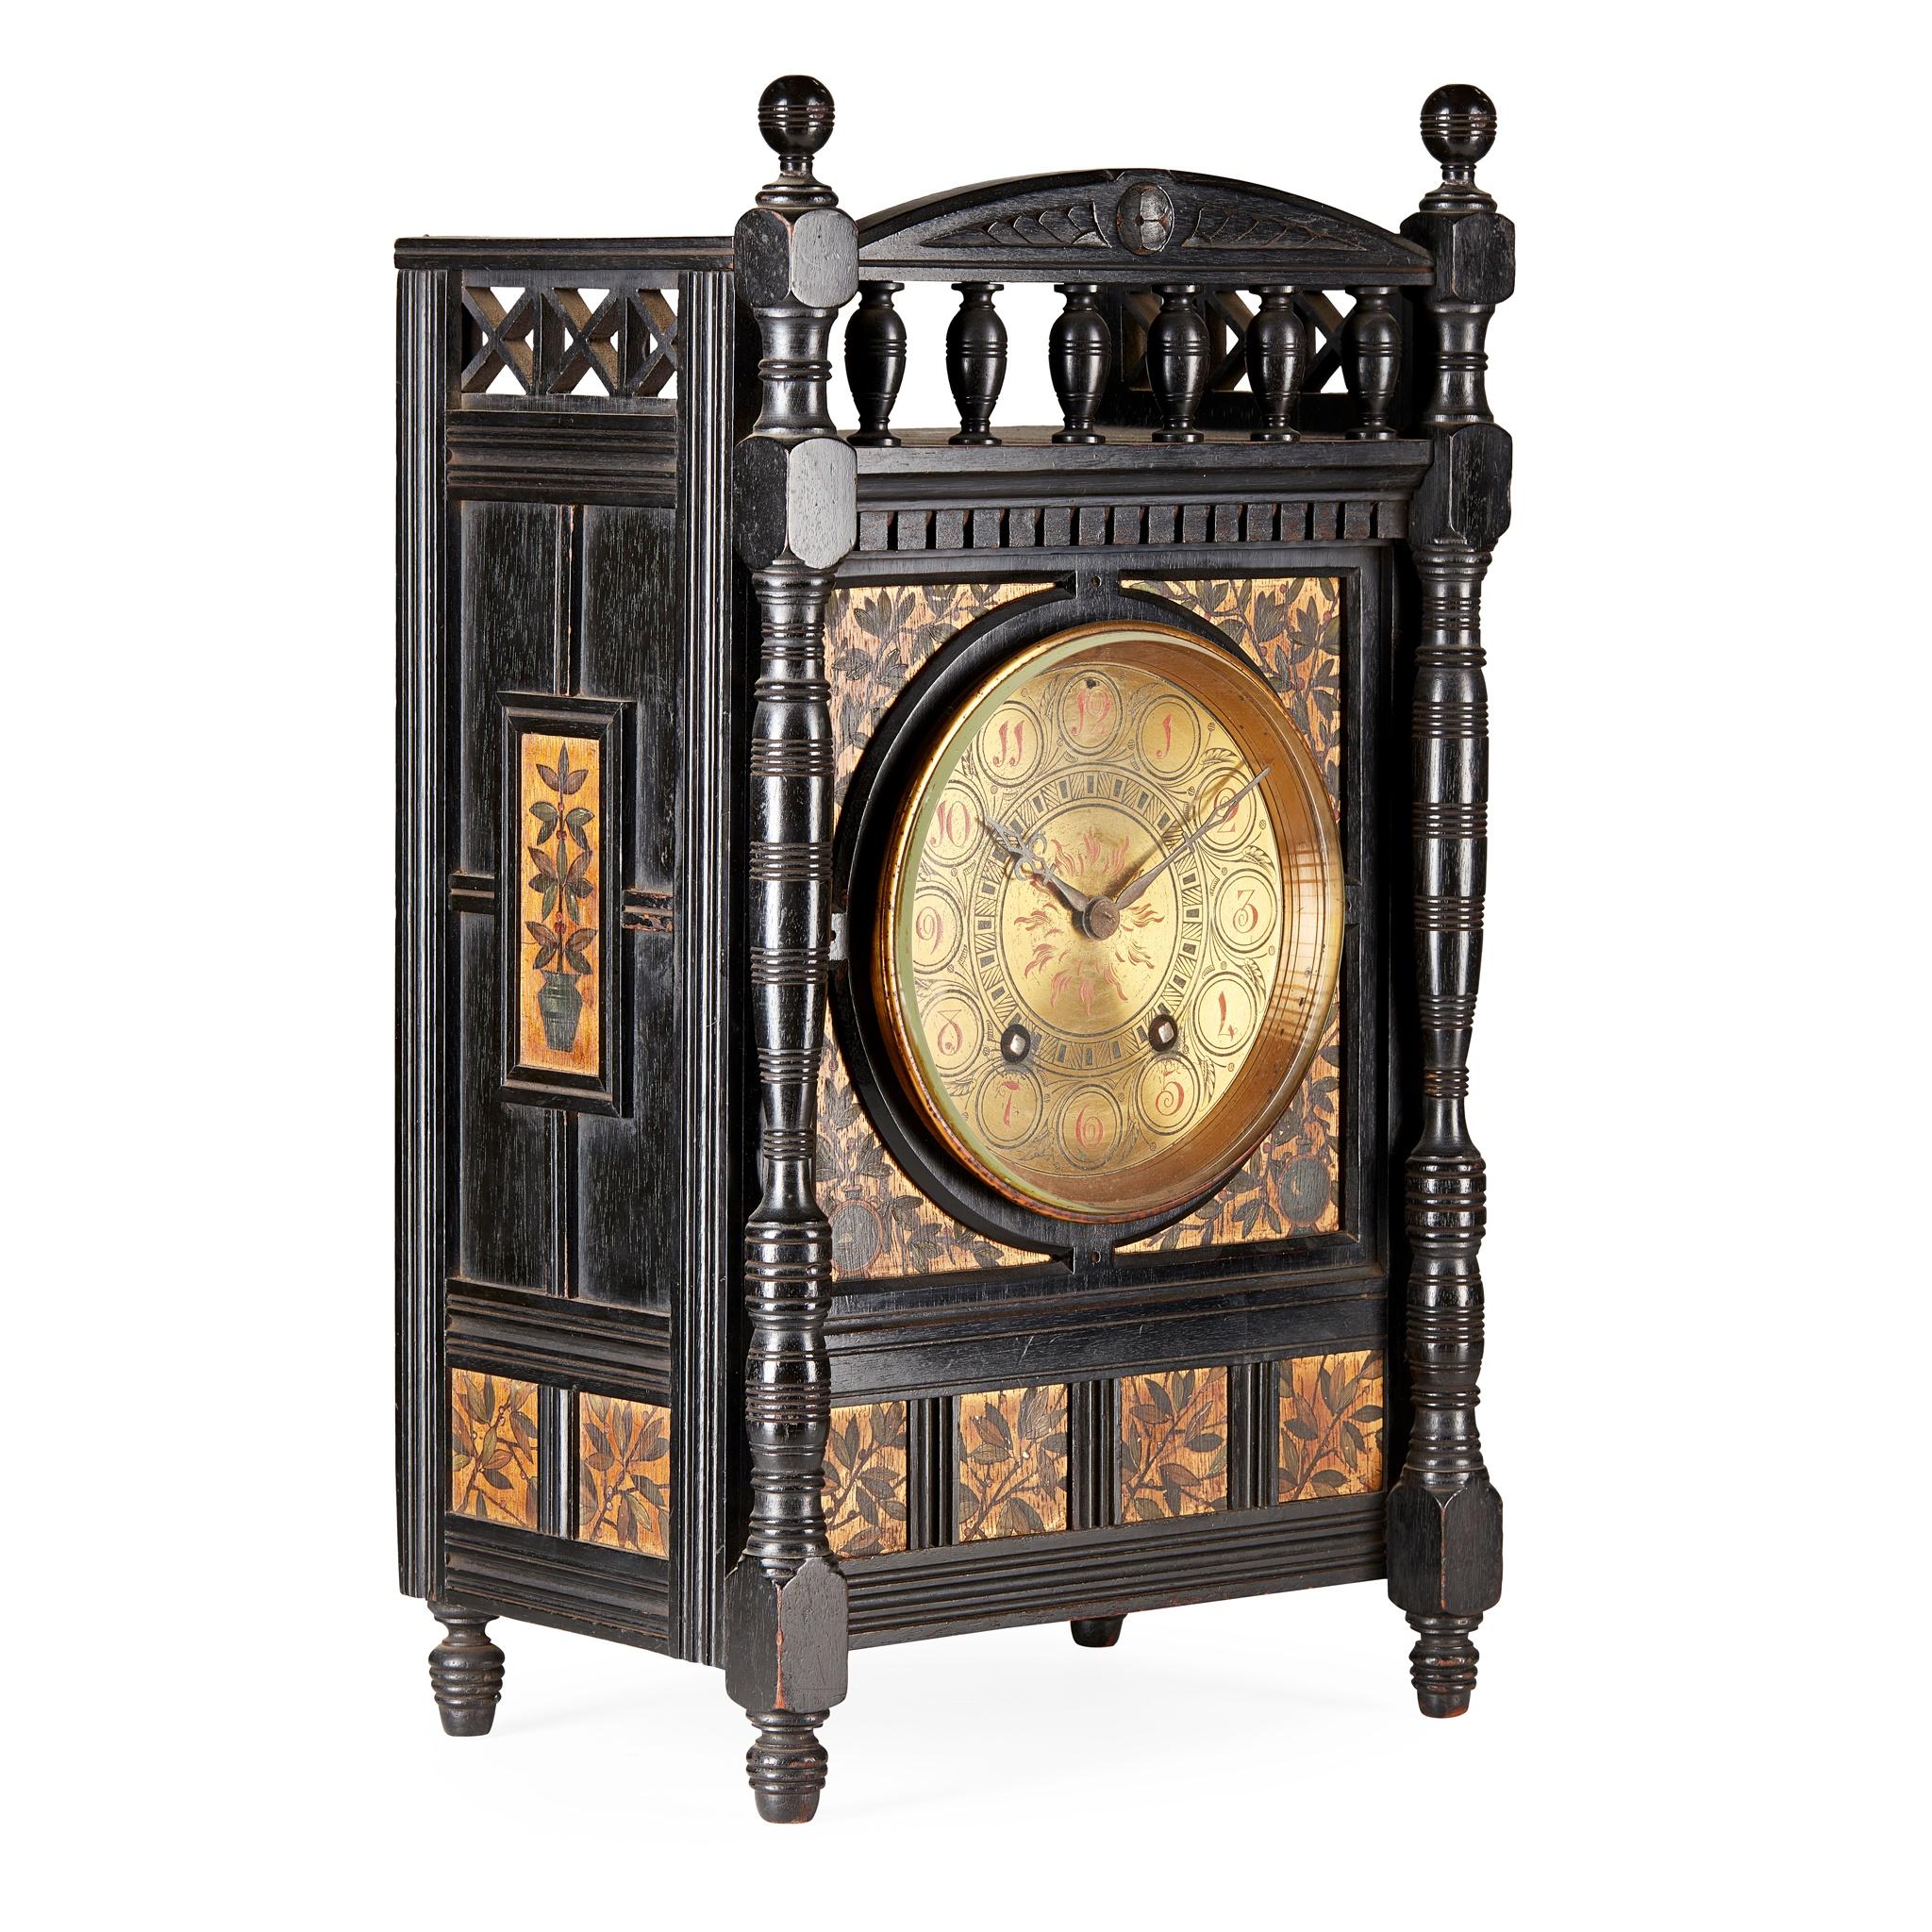 Lewis Foreman Day, for Howell, James and Sons.
An Aesthetic Movement ebonized and polychrome painted mantle clock with a carved floret to the centre of the arched and turned gallery flanked by turned finials, with a dentil moulding below, and criss